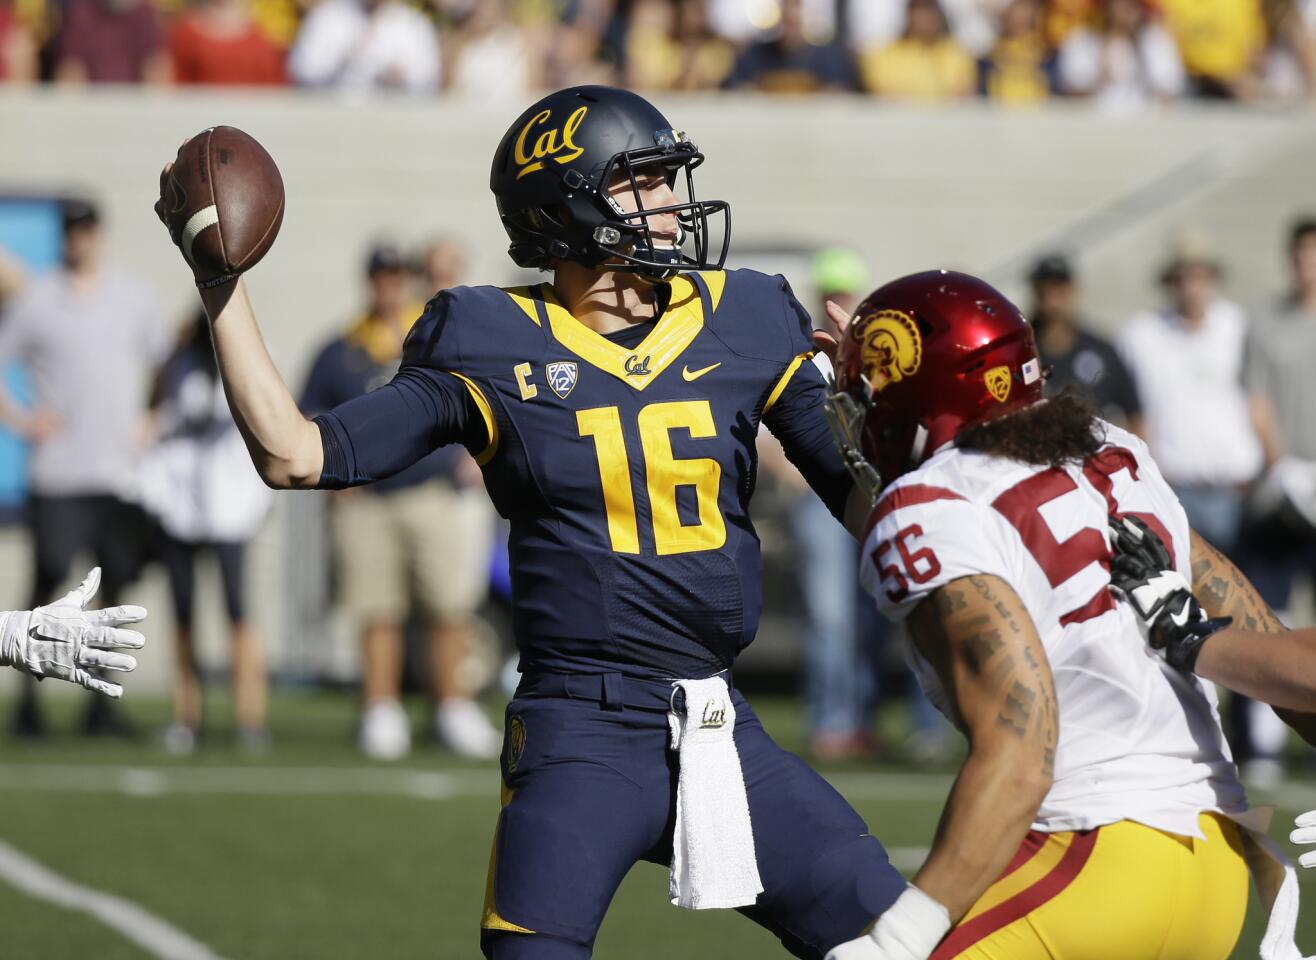 California quarterback Jared Goff gets set to pass while under pressure from USC linebacker Anthony Sarao in the second half.